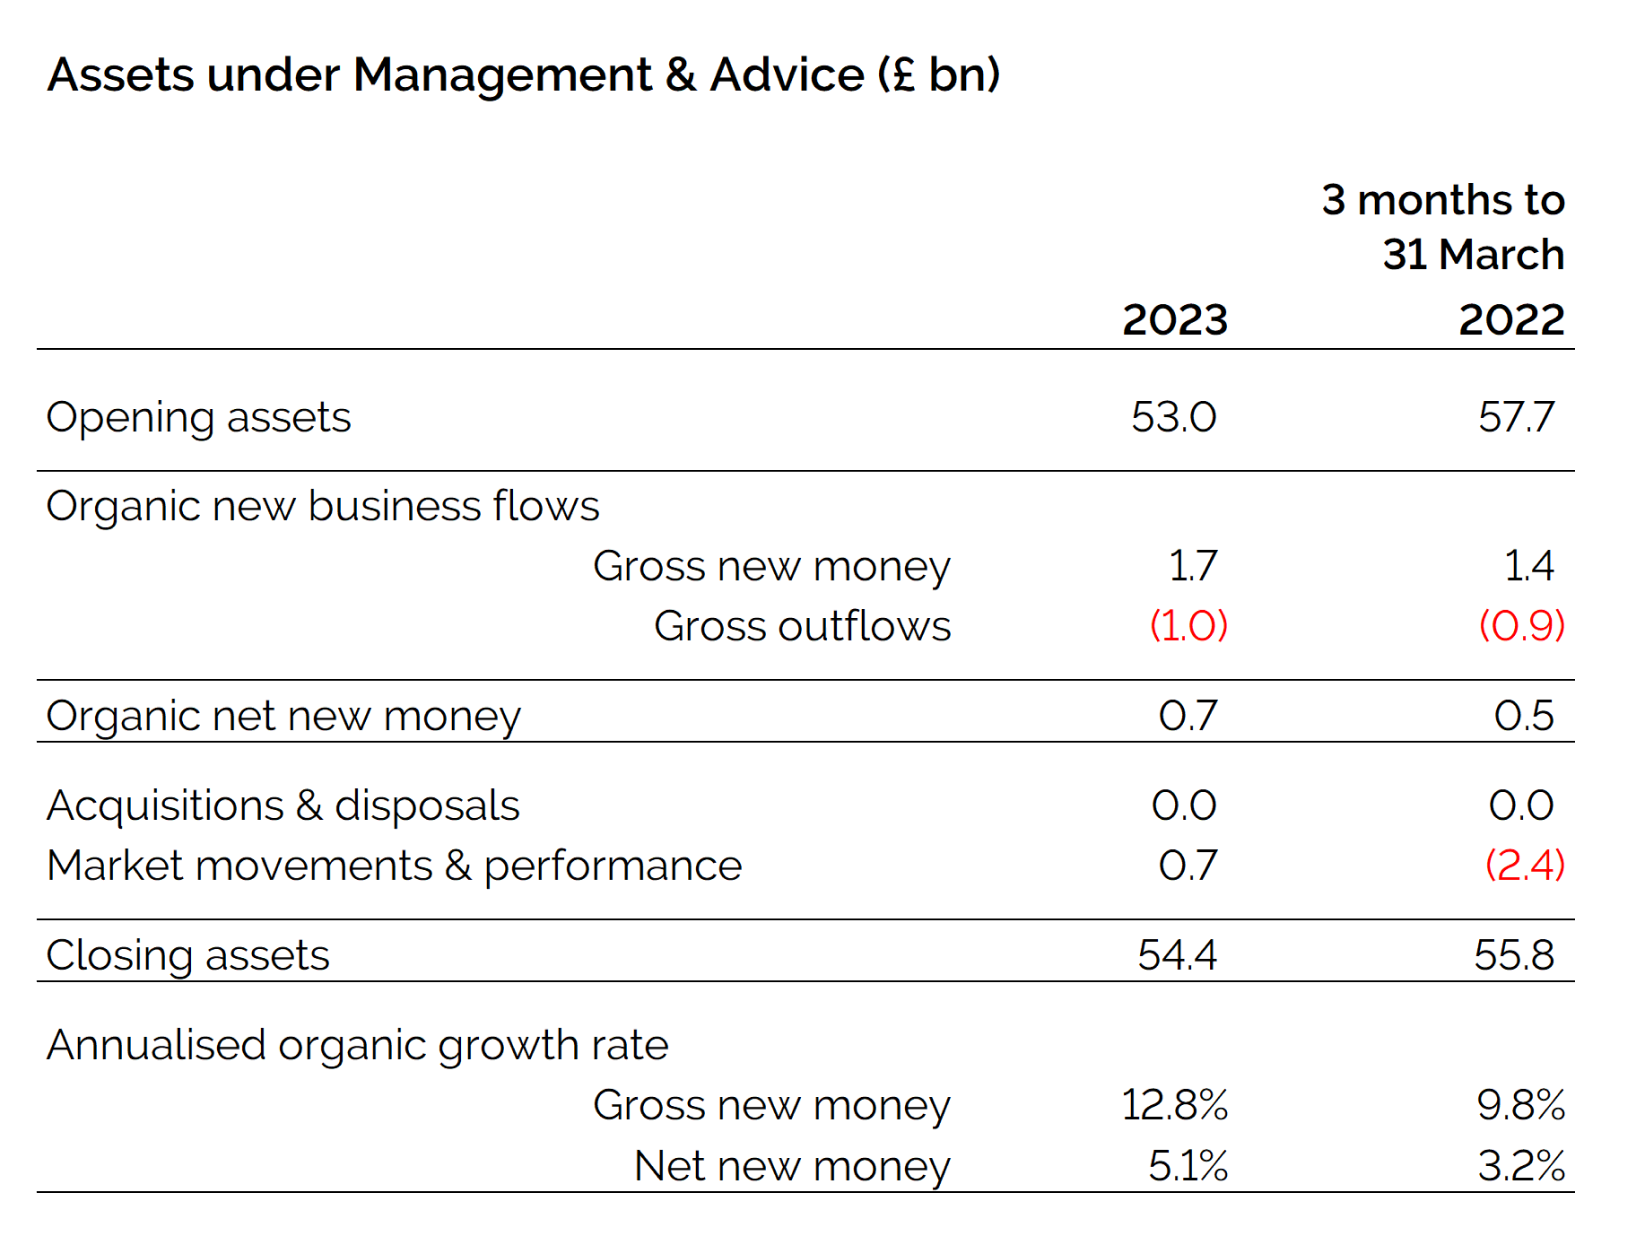 Assets under Management (£bn) as at 31 March 2023